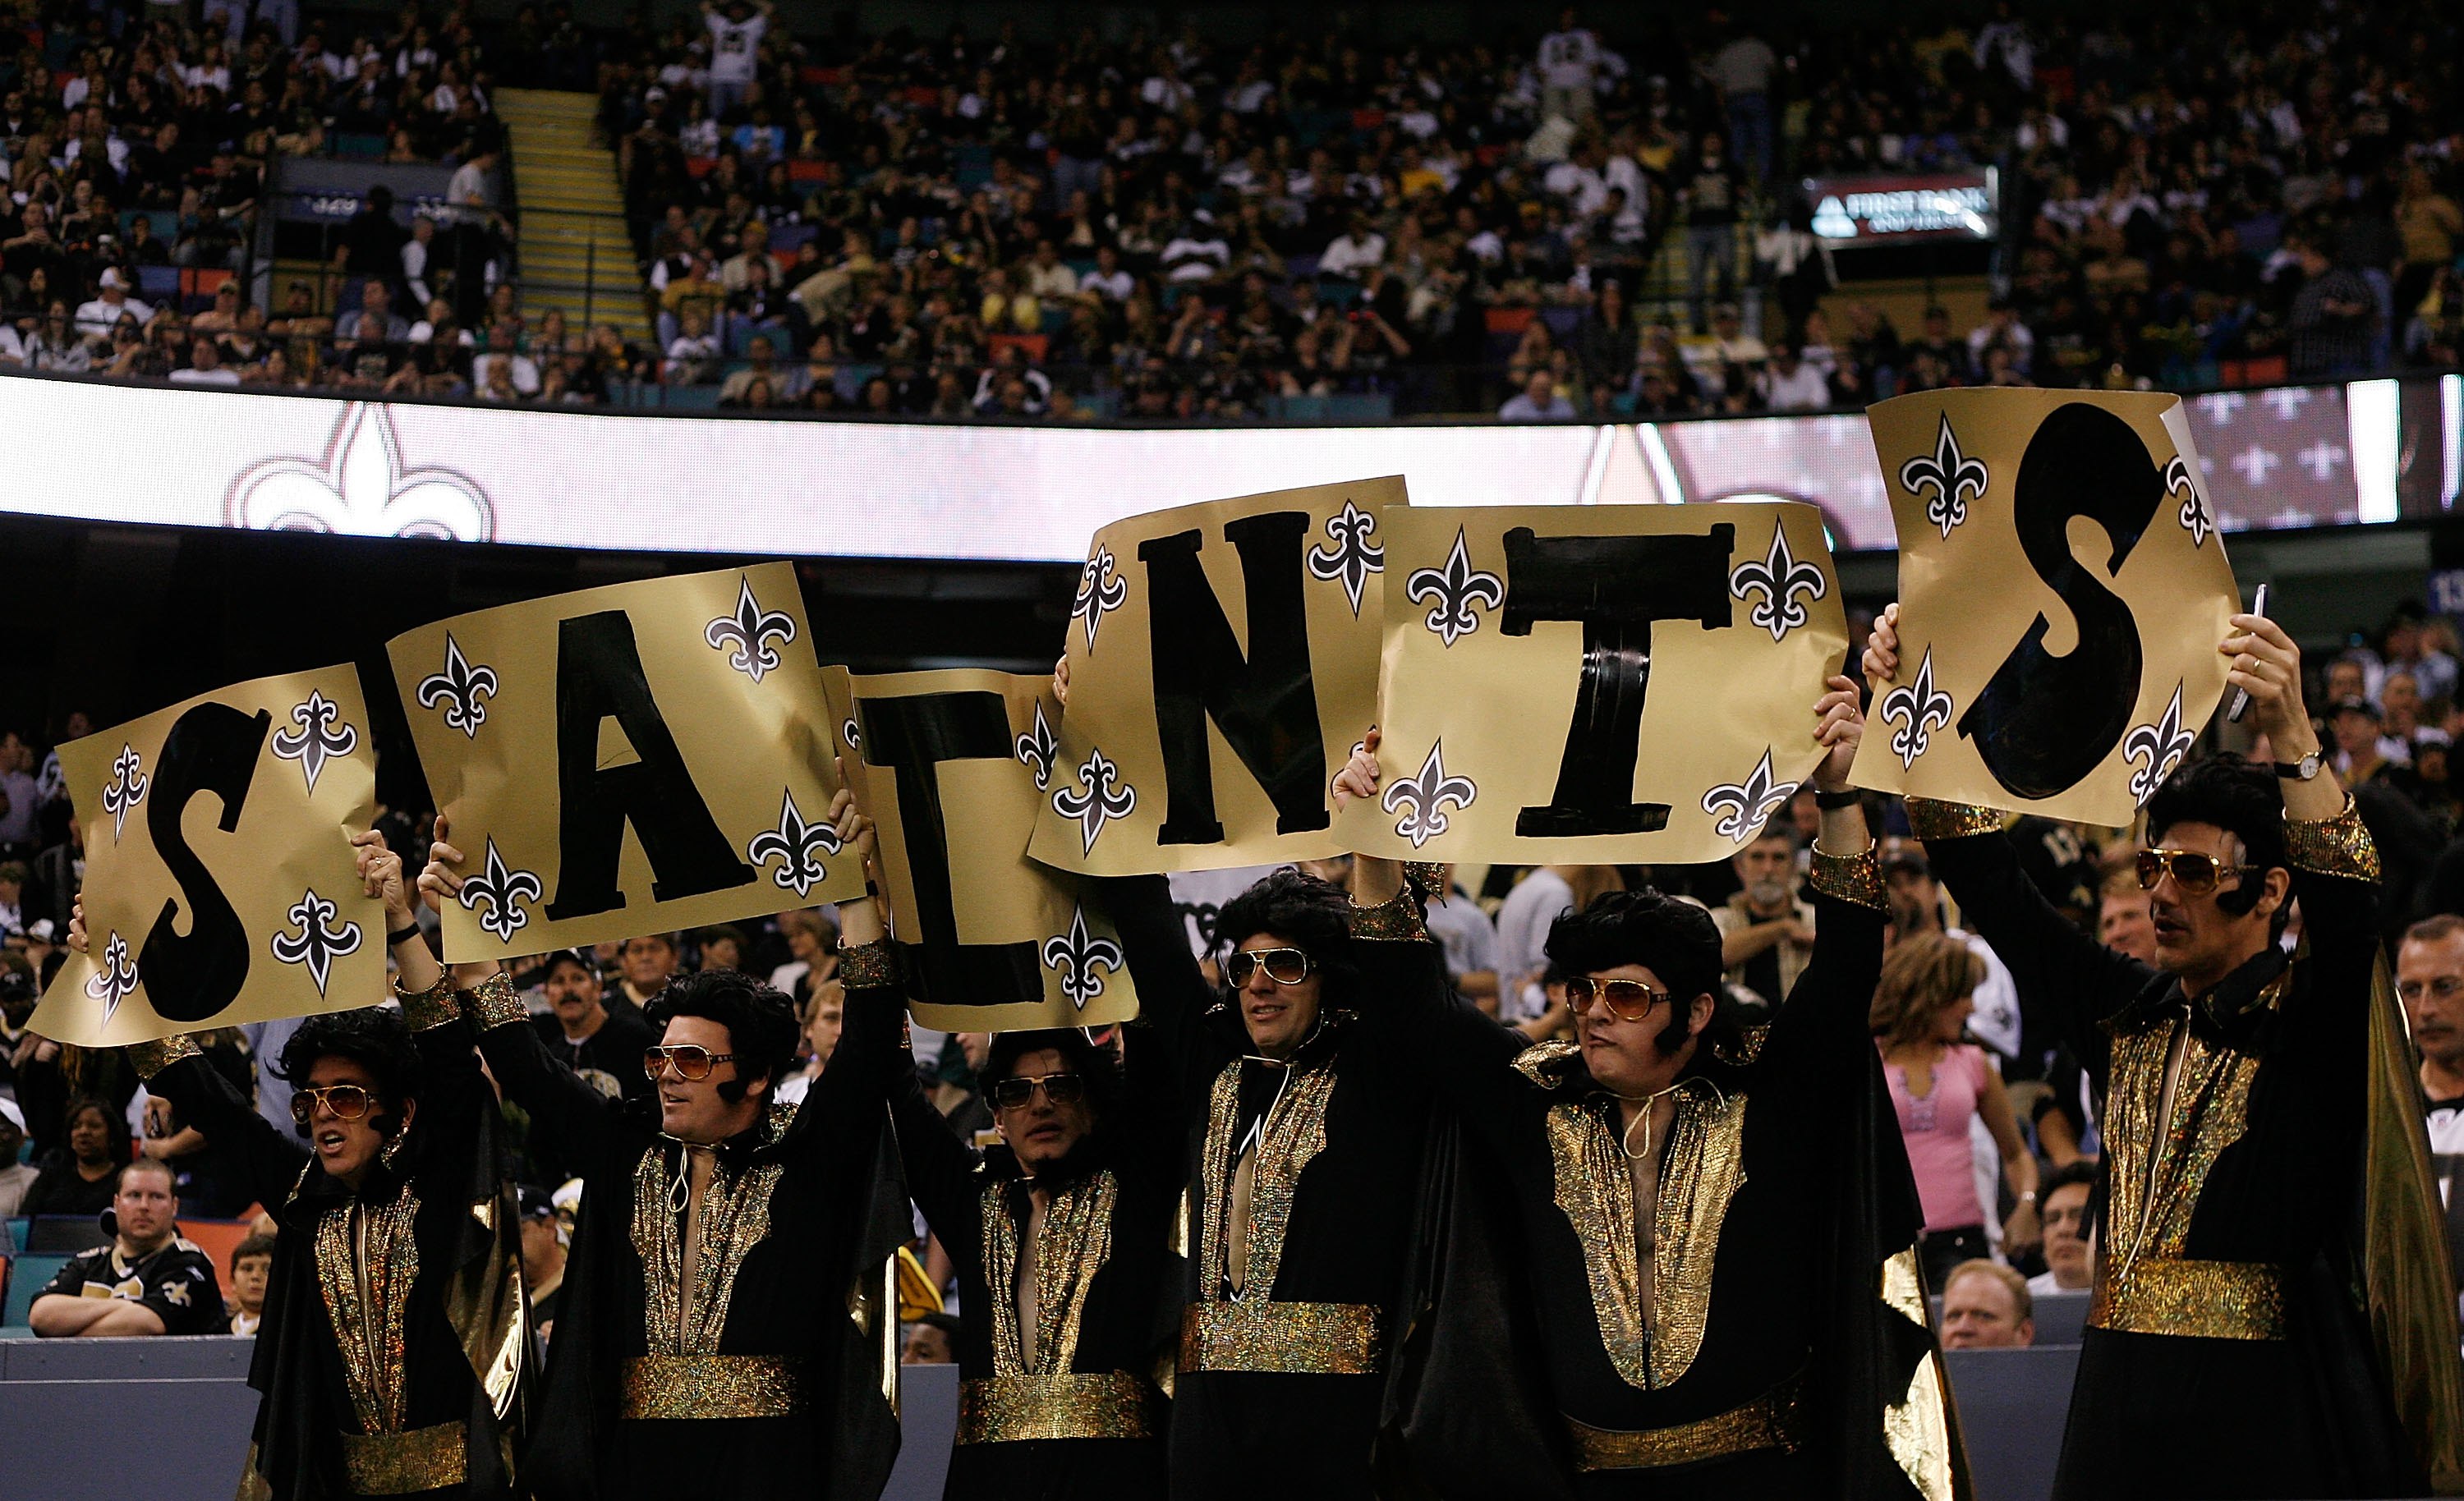 Saints fans holding up a sign during a game